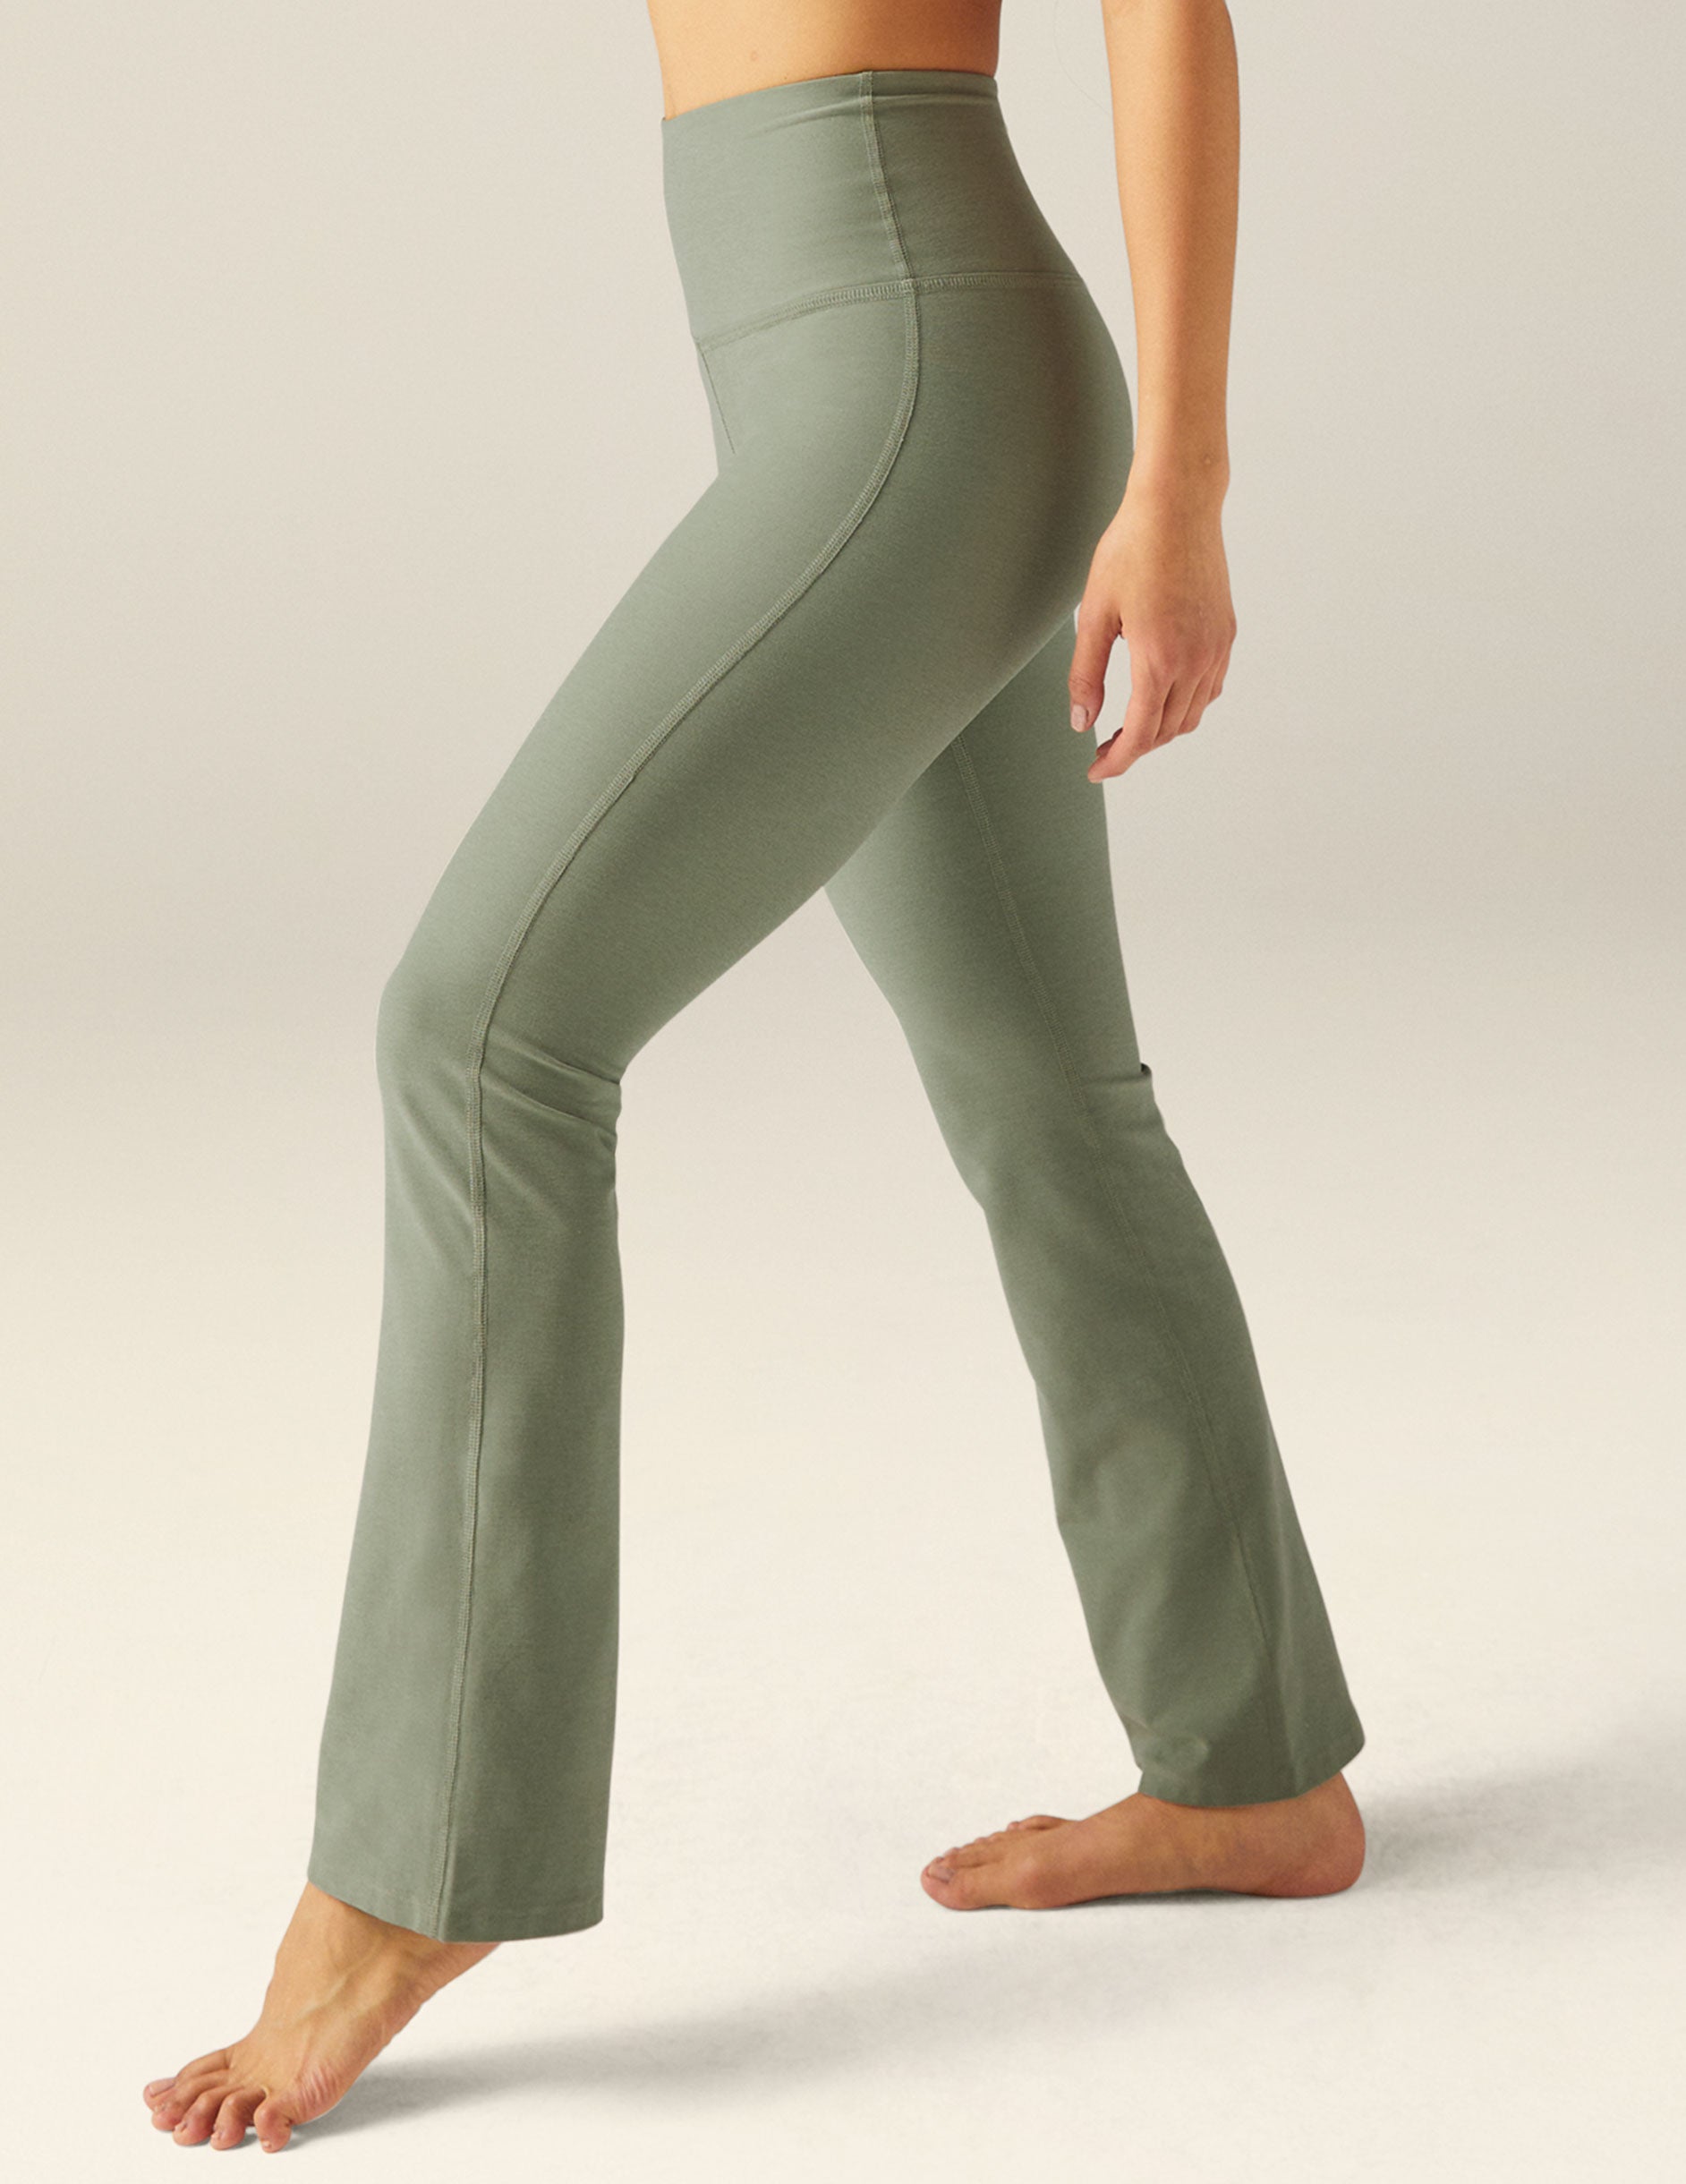 Beyond Yoga High Waisted Practice Pant in Grape Rose Heather